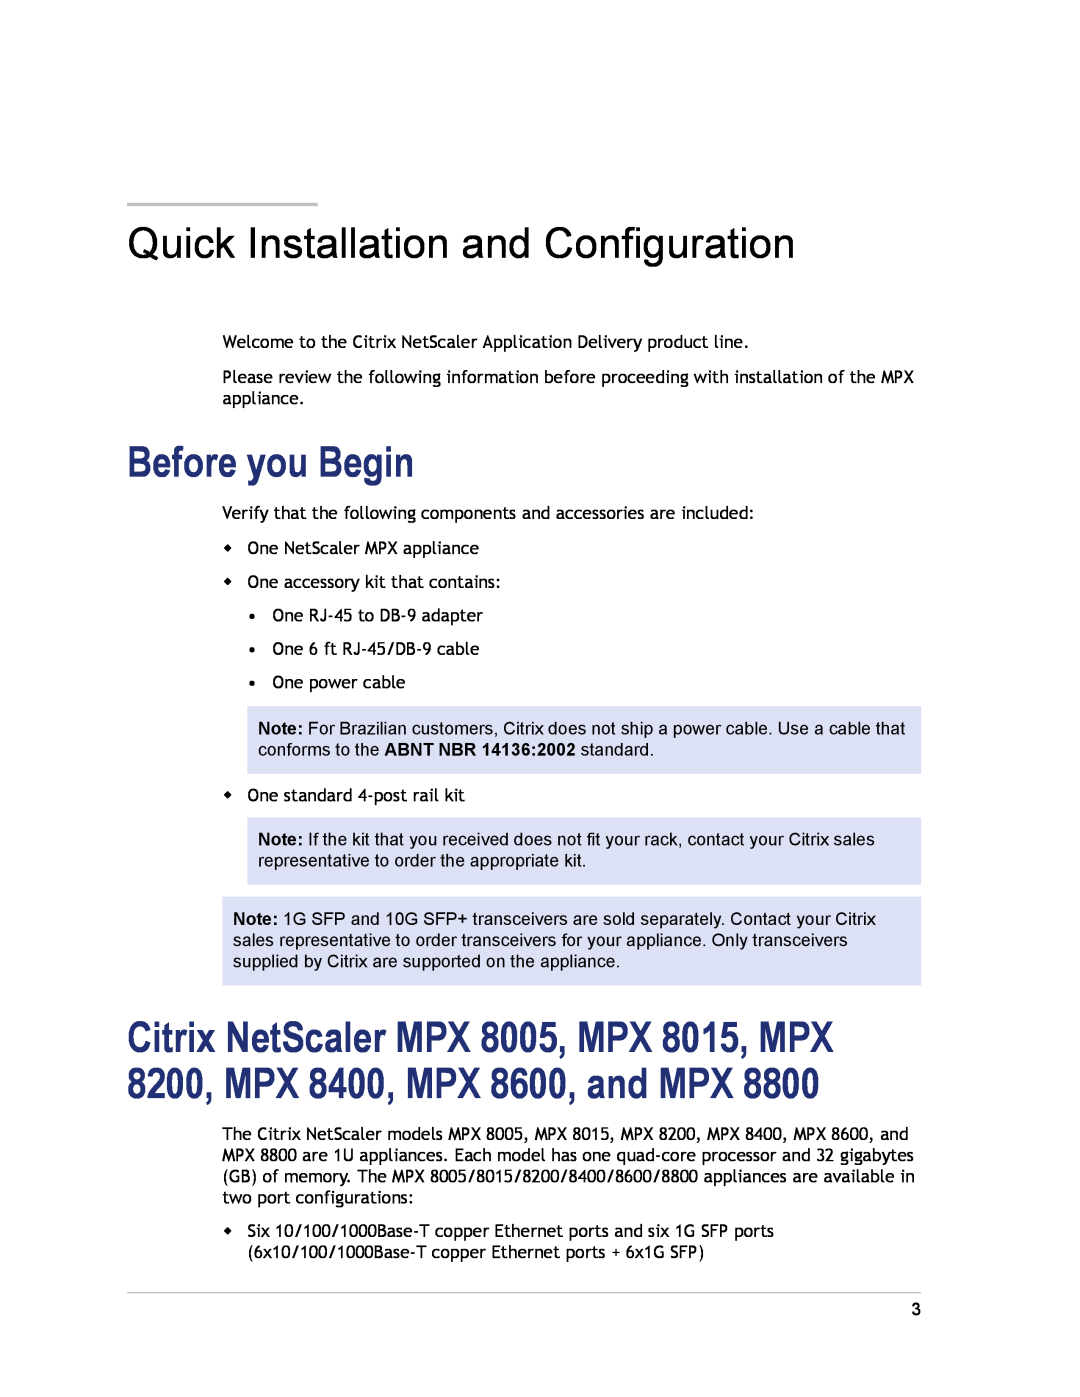 Citrix Systems 8005, 8800, 8600, 8200, 8400, 8015 quick start Before you Begin, Quick Installation and Configuration 